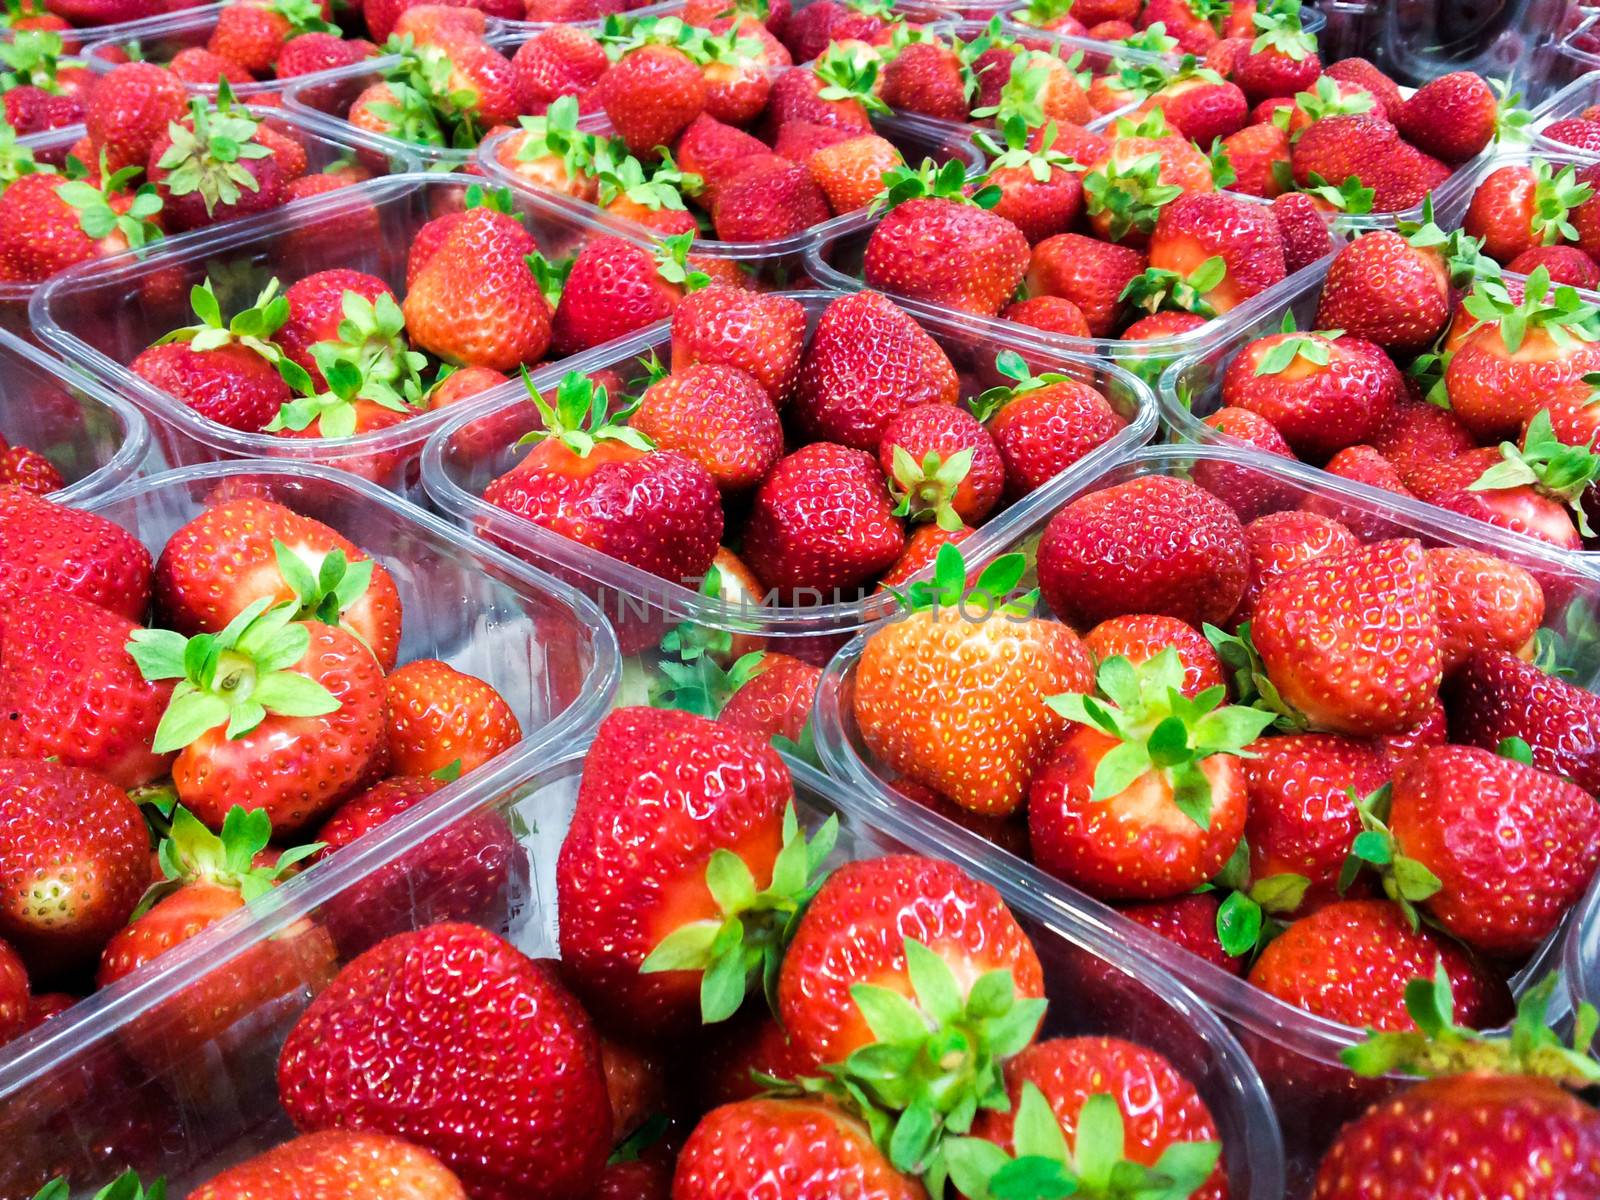 Strawberries with green weed in plastic containers at marketplace